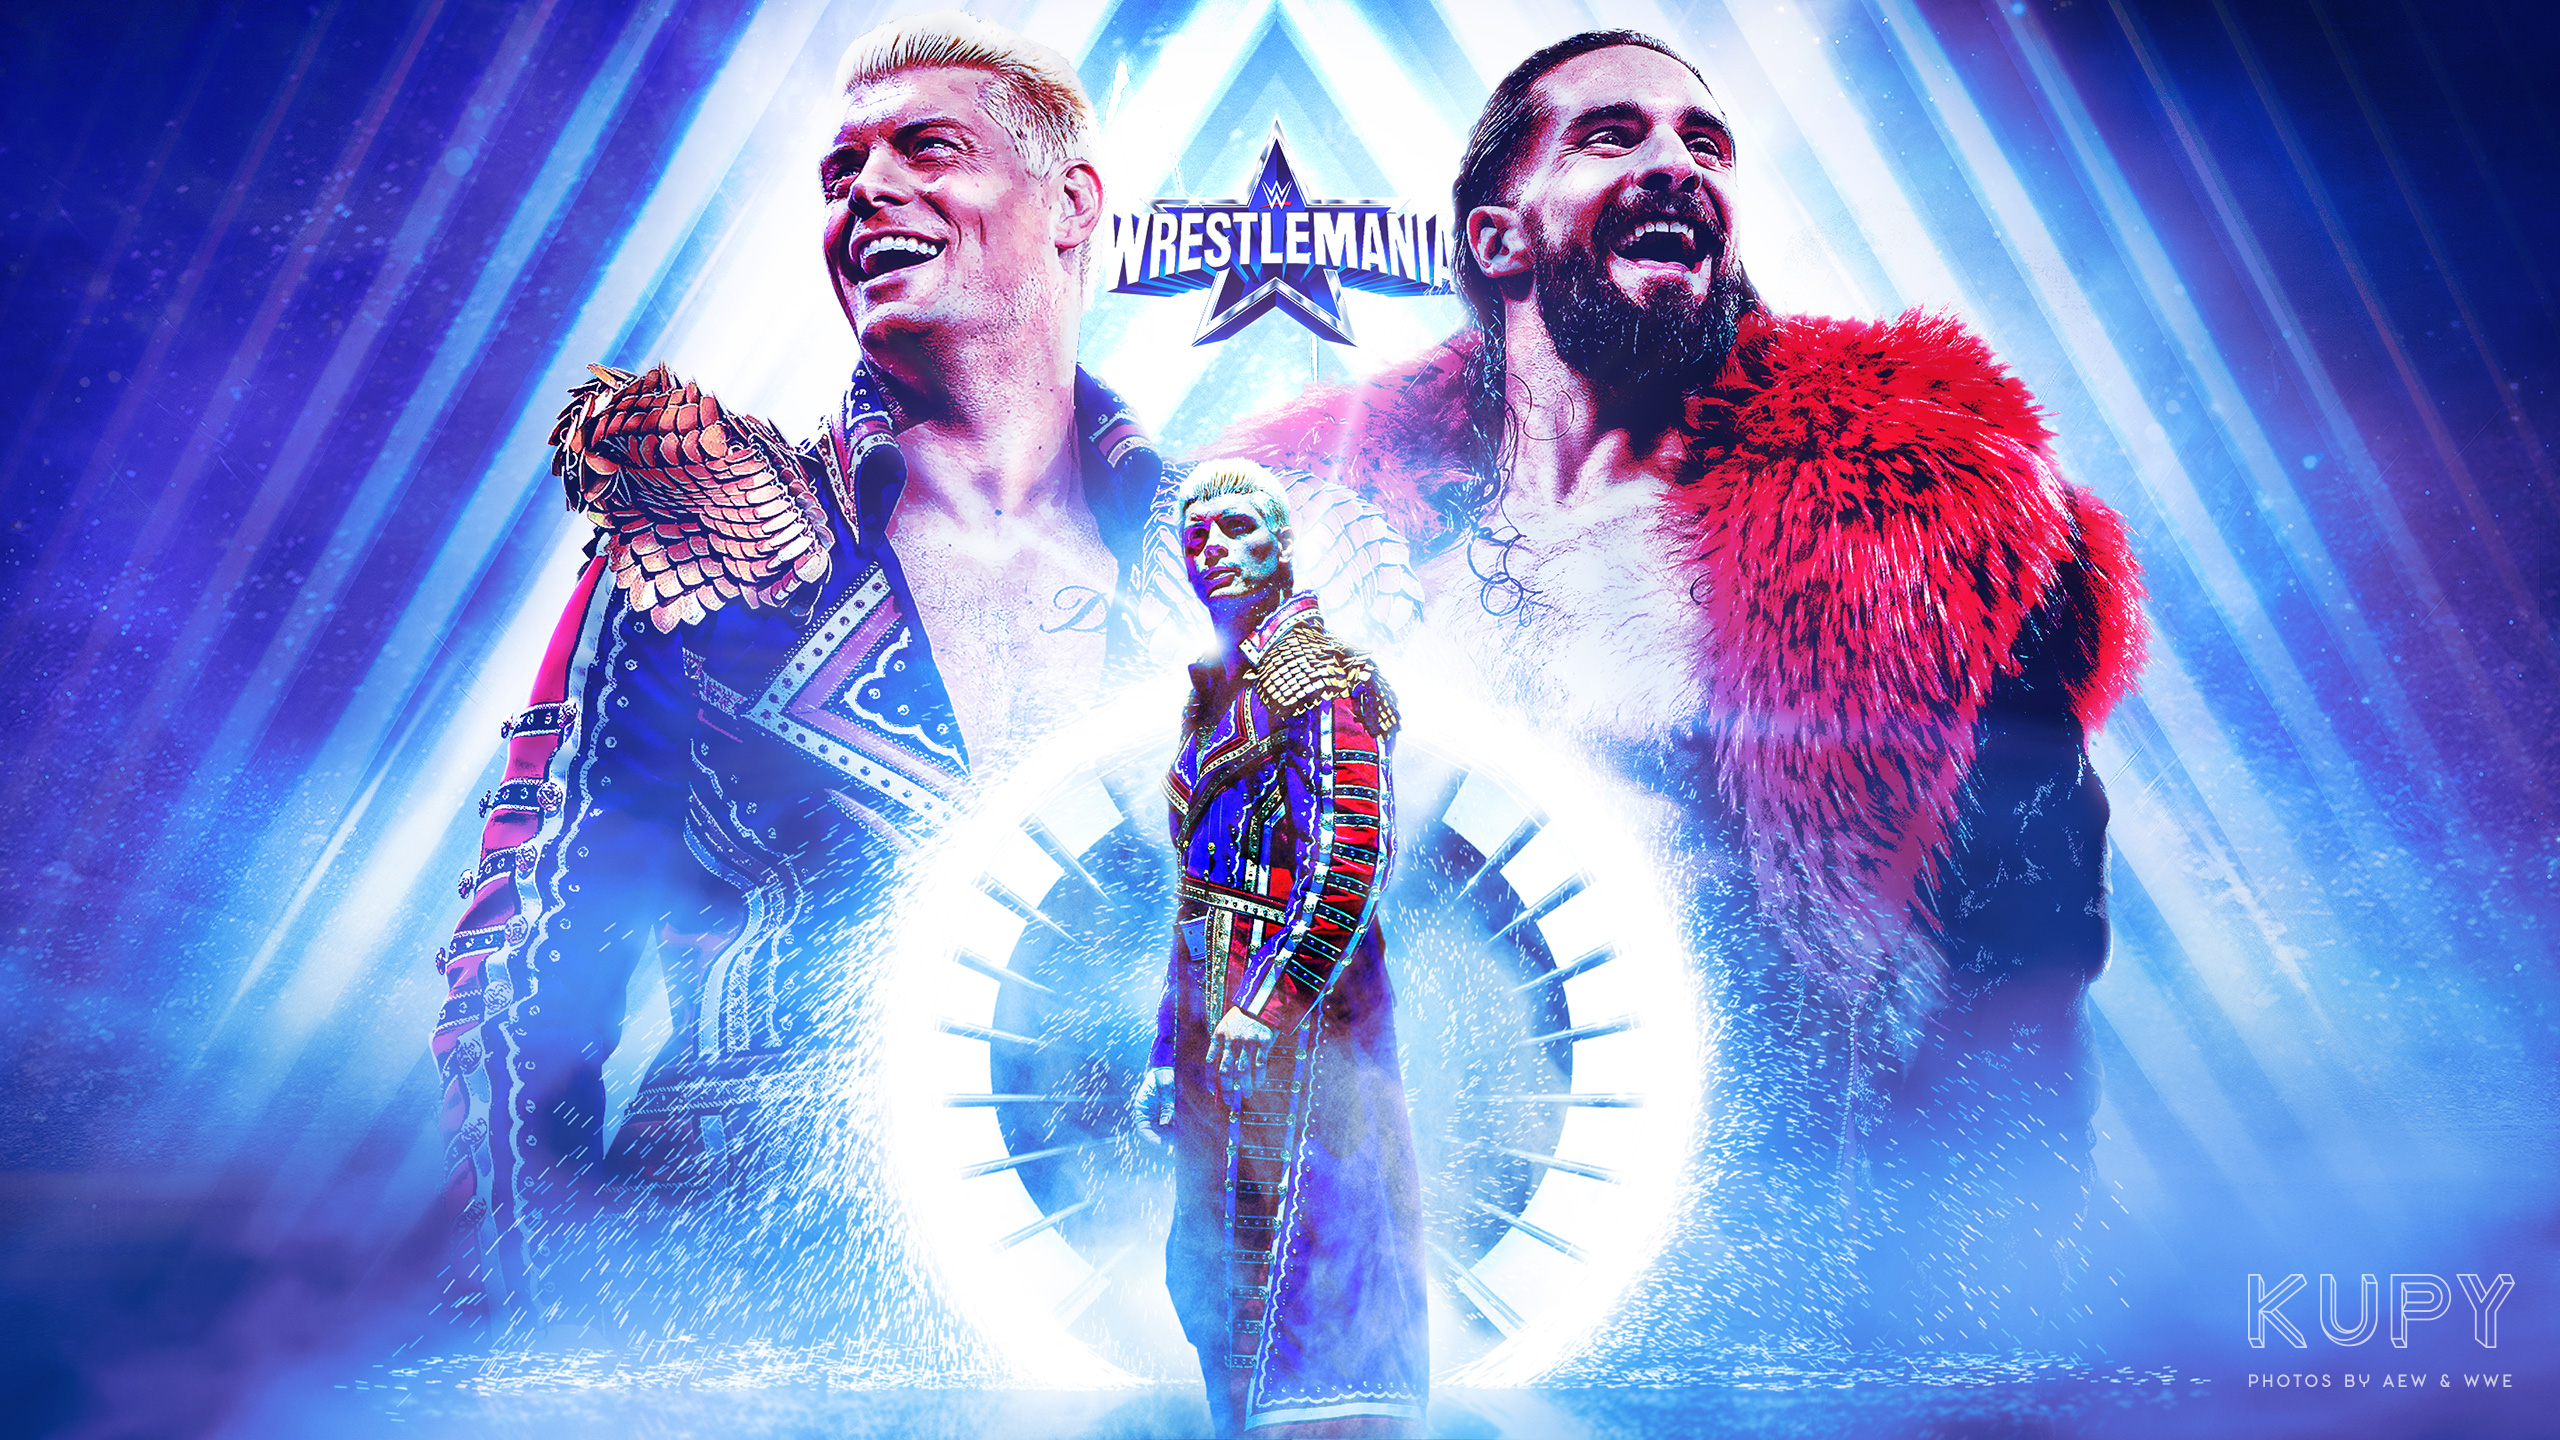 Wrestle Mania Wallpapers